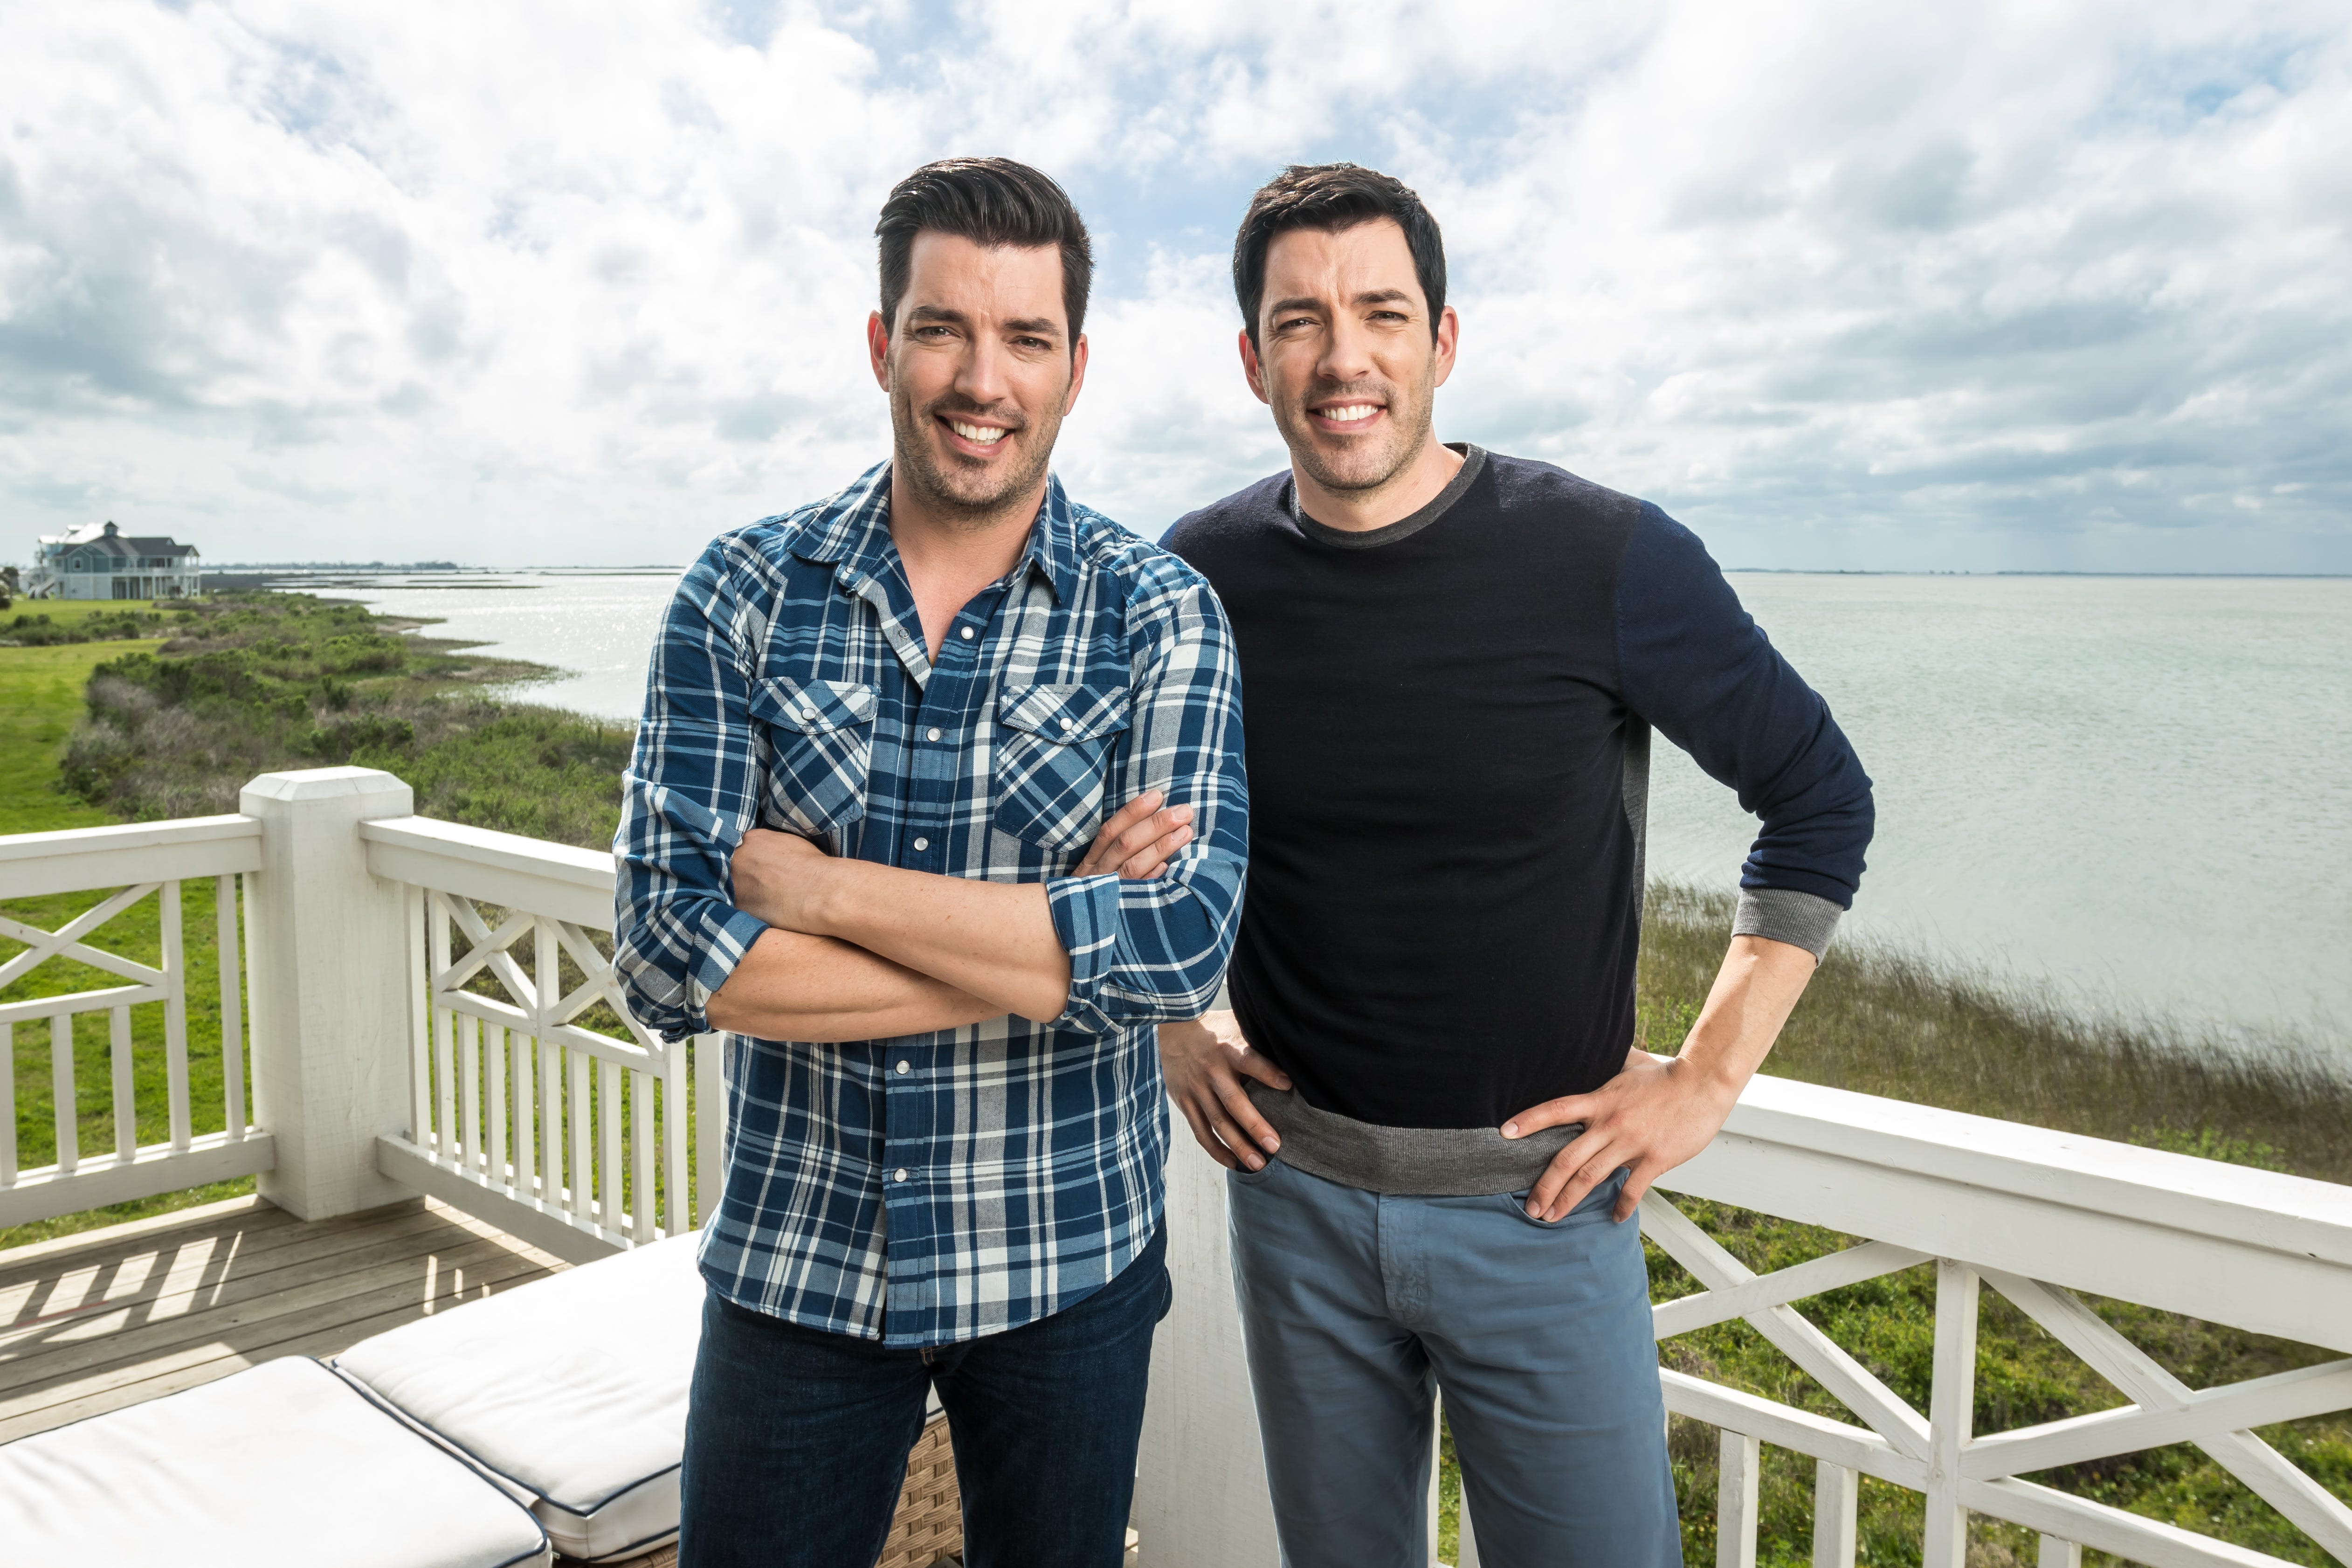 How many brothers. Brothers. Братья USA. Property brothers. Братья донгер.